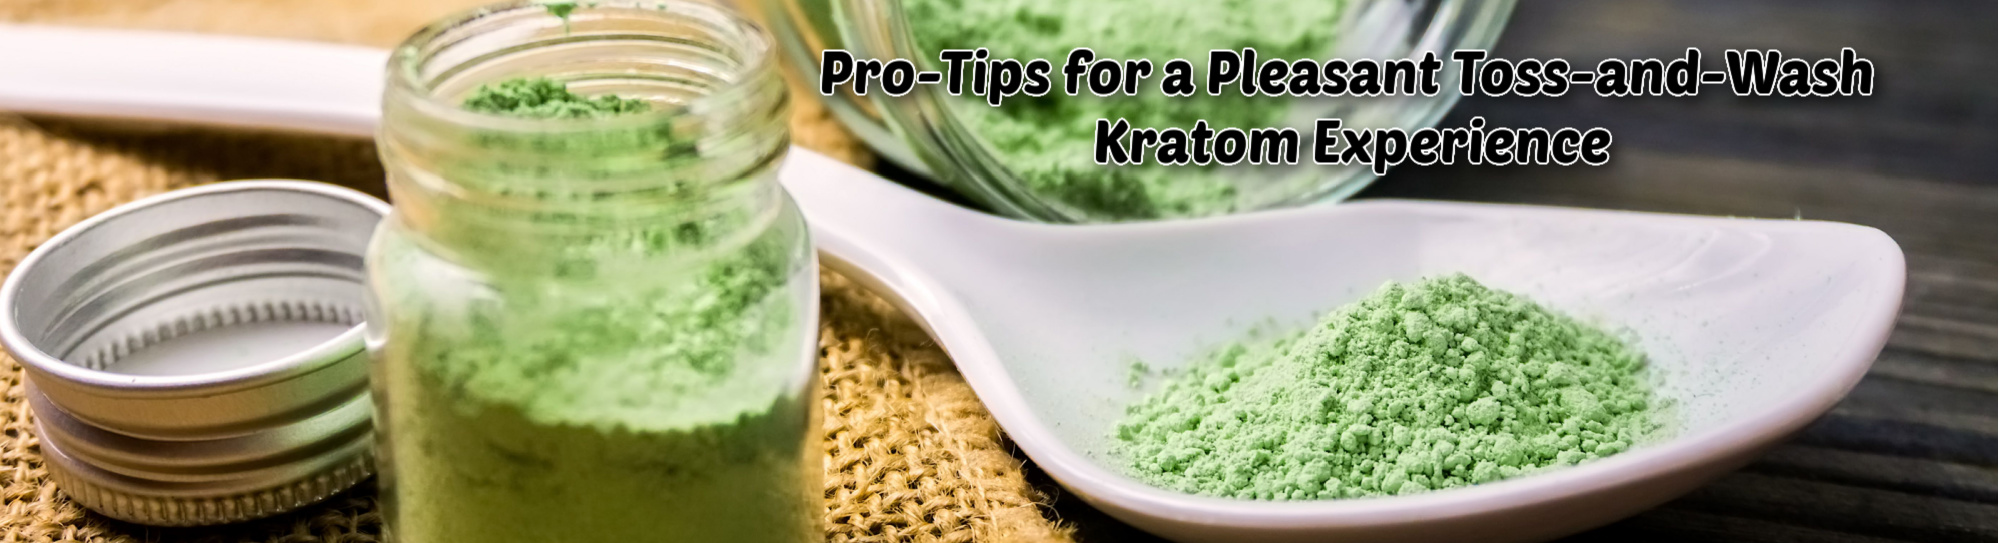 image of pro tips for pleasant toss and wash kratom experience